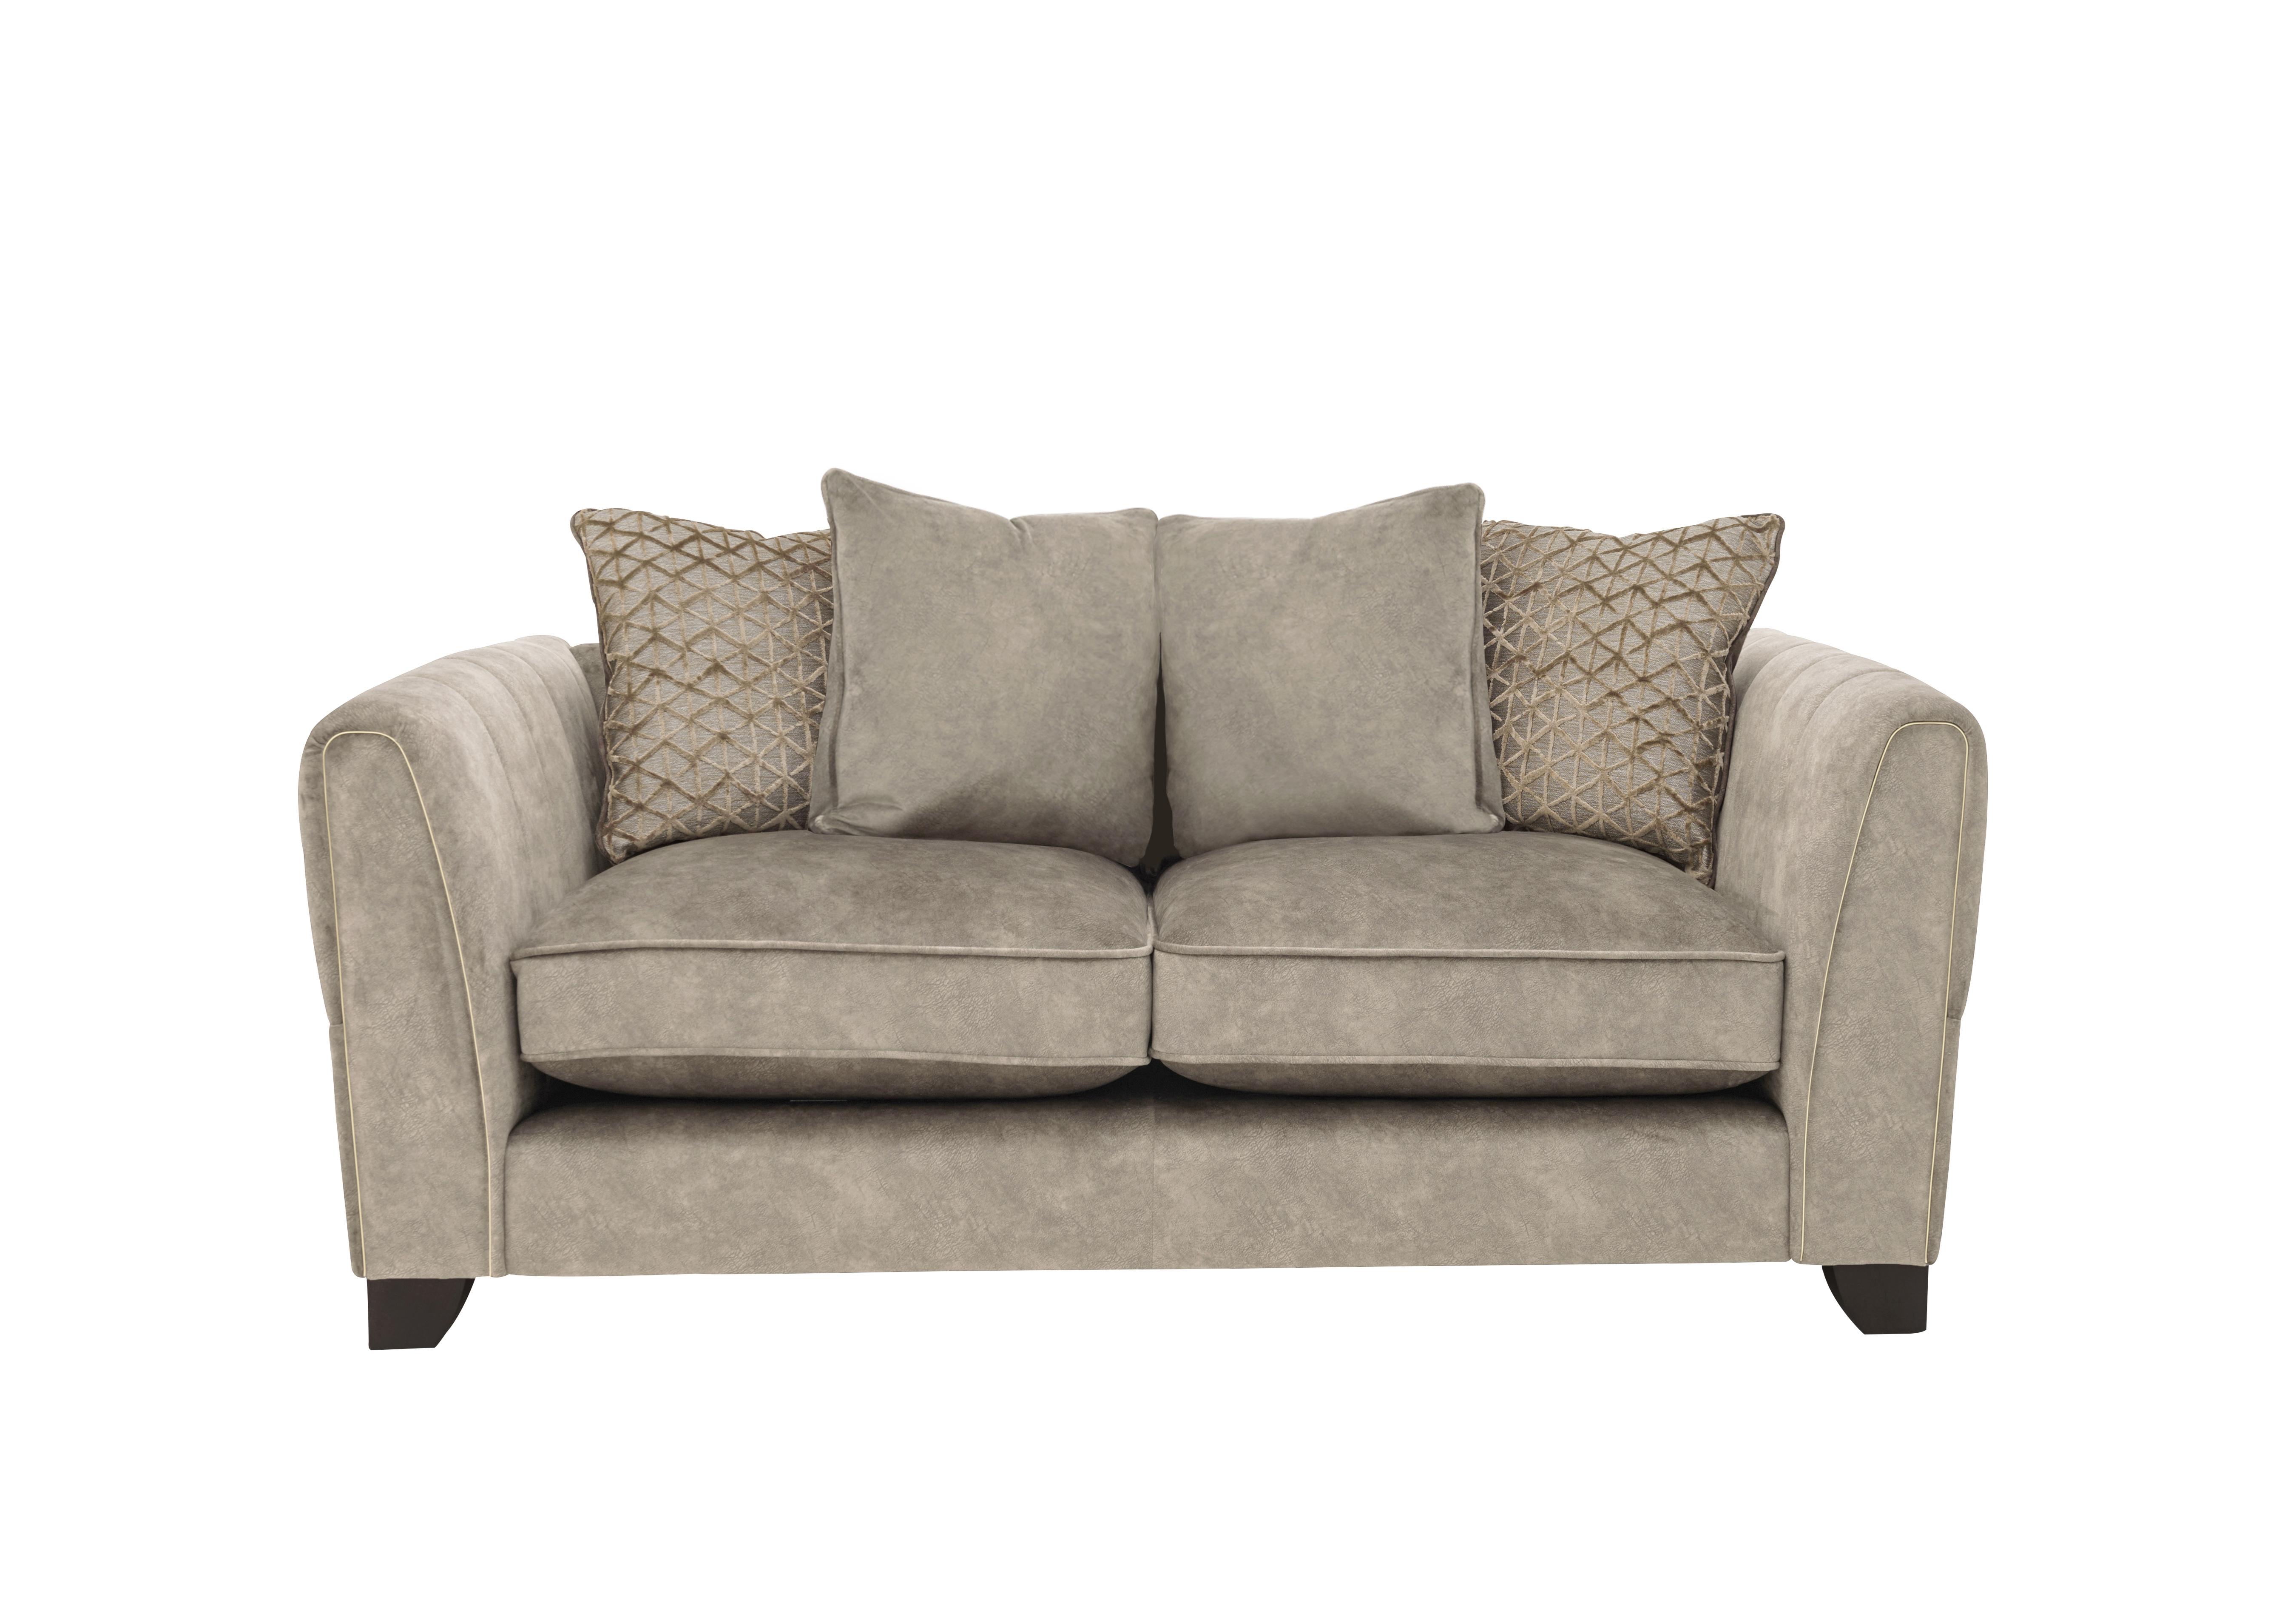 Ariana 2 Seater Fabric Pillow Back Sofa in Dapple Oyster Brass Insert on Furniture Village